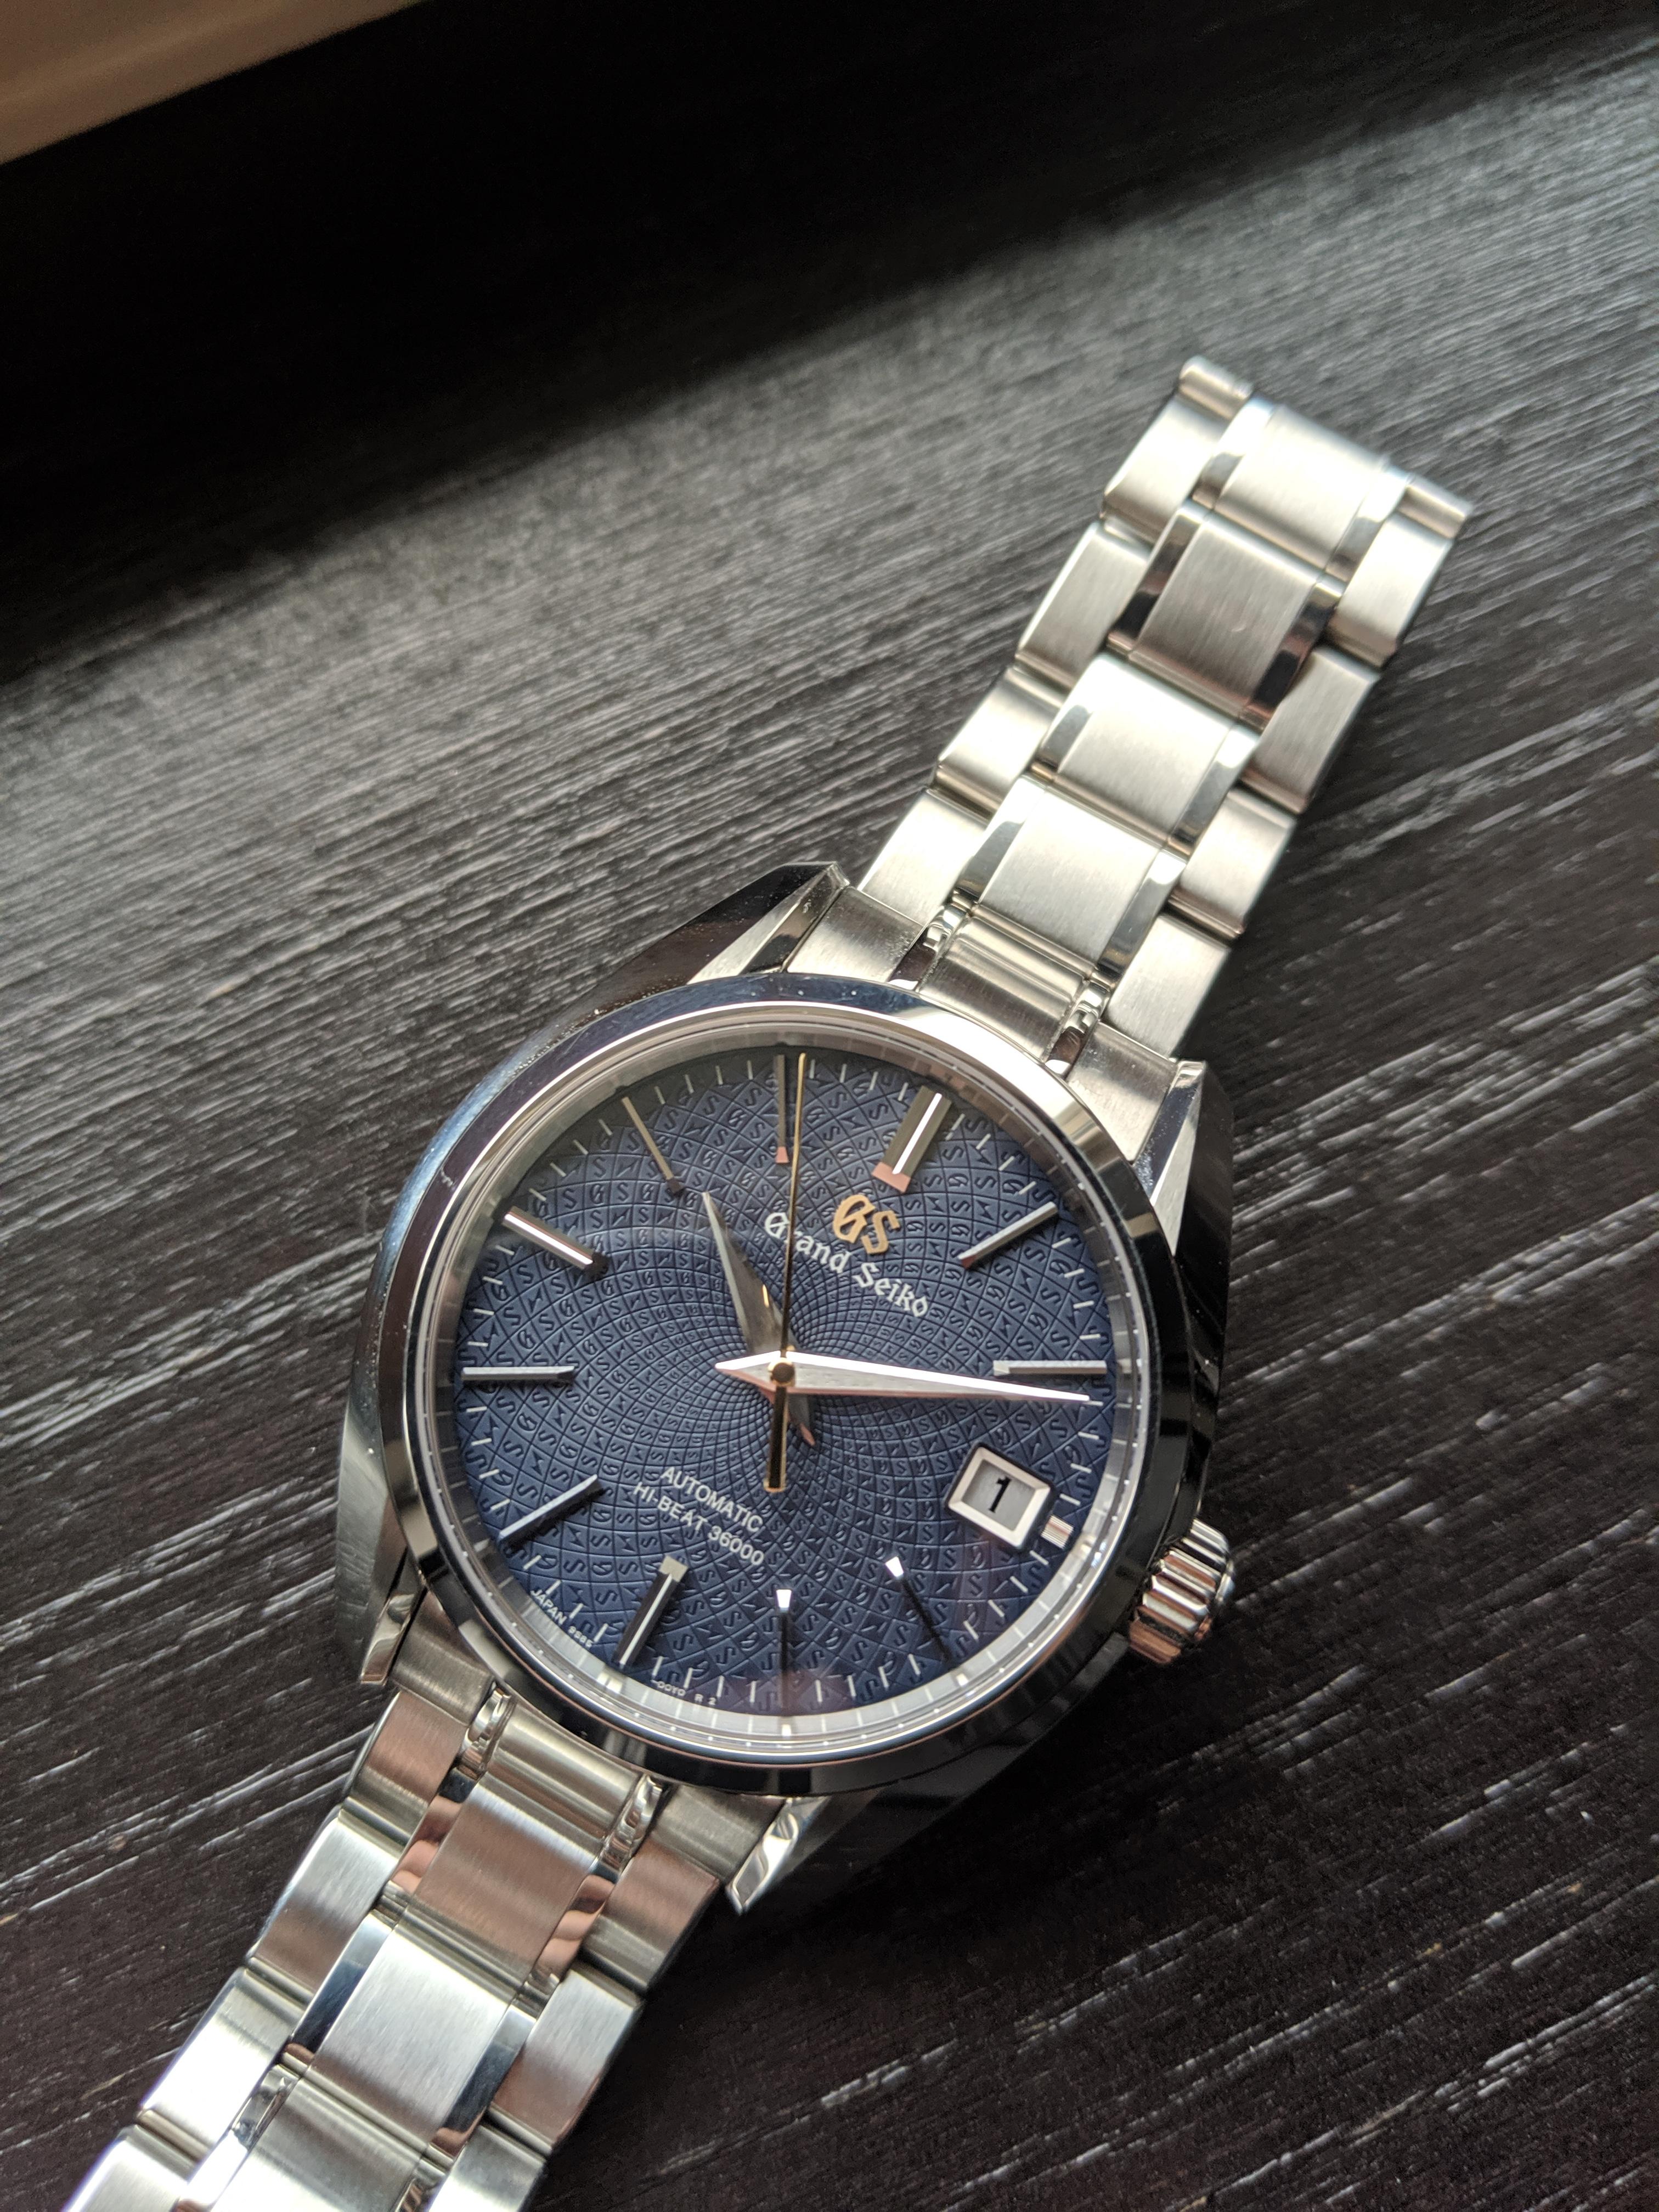 WTS] Grand Seiko SBGH267 - Blue Spiral Dial Limited Edition - 9S Caliber  (Full Kit) | WatchCharts